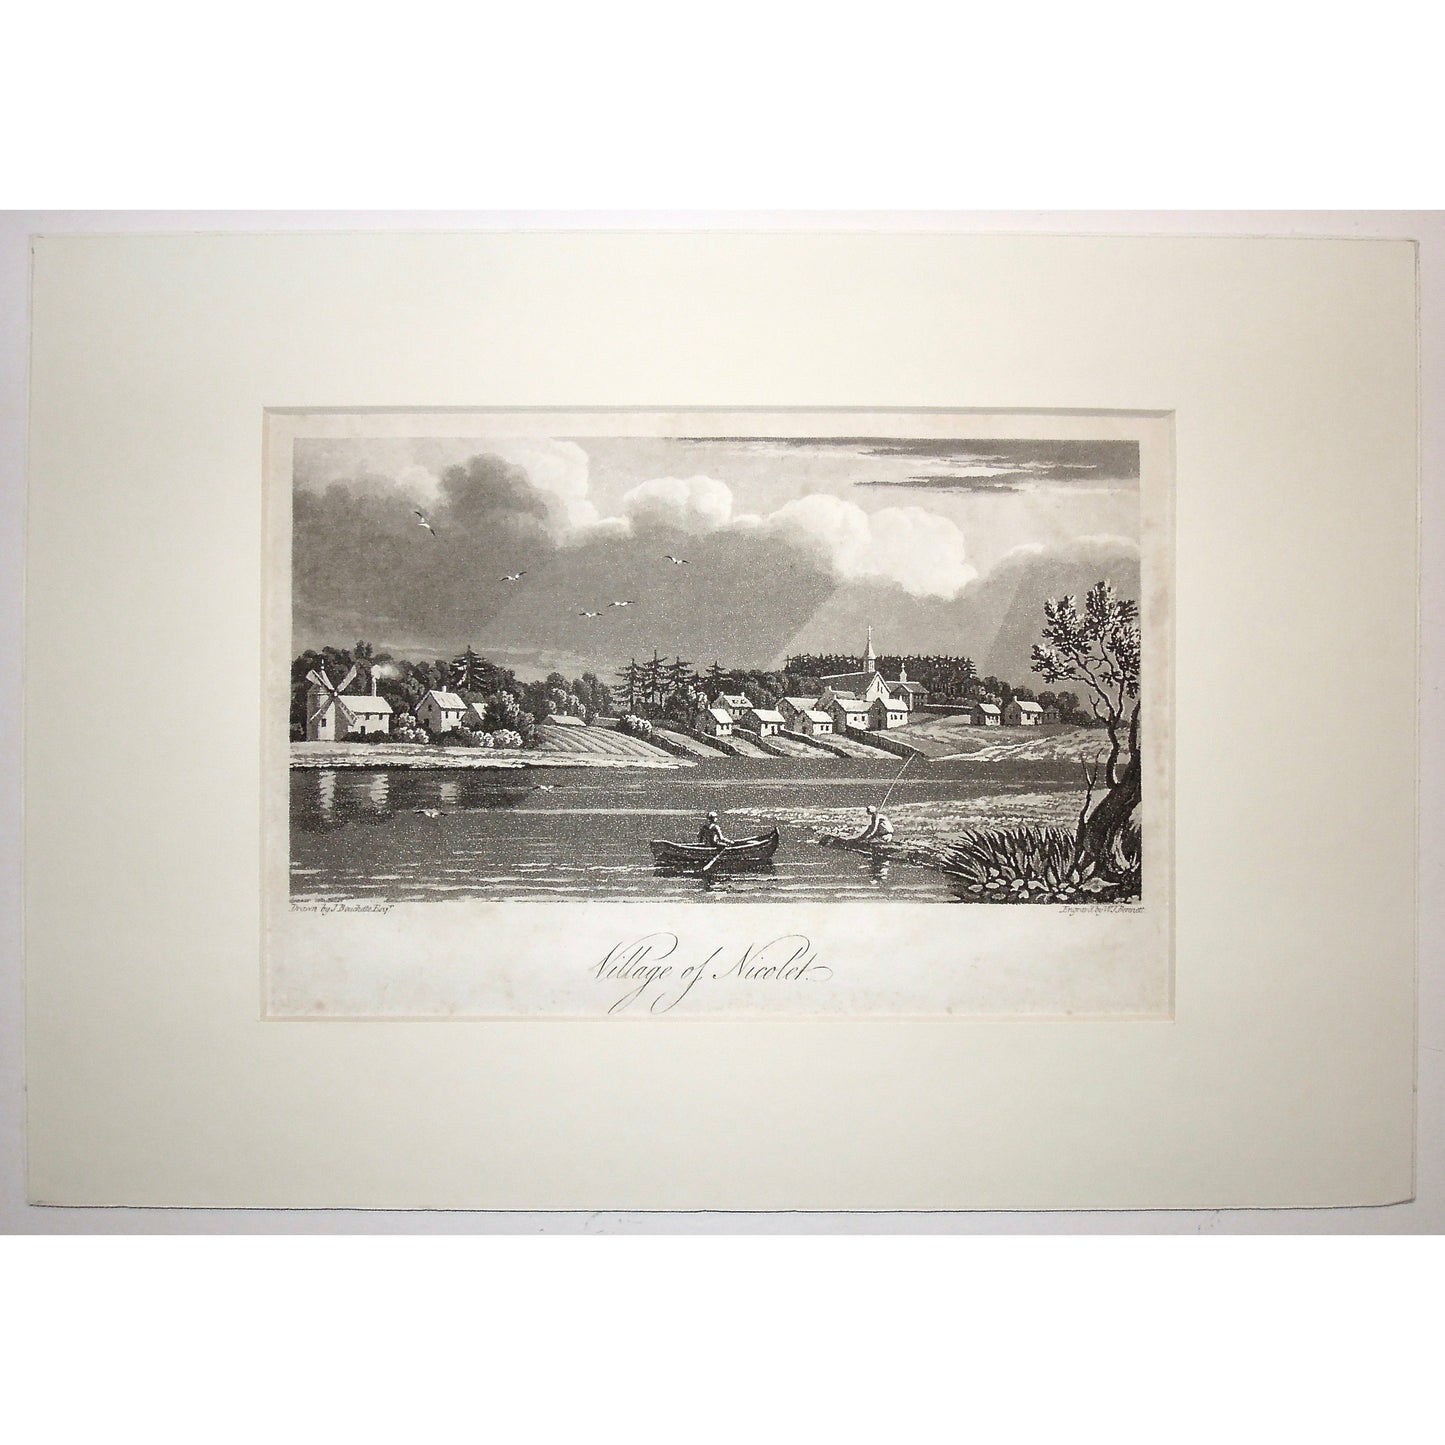 Village, town, Village of Nicolet, Nicolet, windmill, boat, row boat, fishing, church, canadian town, A Topographical Description of the Province of Lower Canada, Lower Canada, Joseph Bouchette, Bouchette, 1815, W. Faden, Faden, W. J. Bennett, Bennett, Charing Cross, London, steel engraving, black and white, Original Prints, Rare prints, Old Prints, Old Books, Art, Decor, Engraving, Collectors, Canadiana, Historical, Art History,